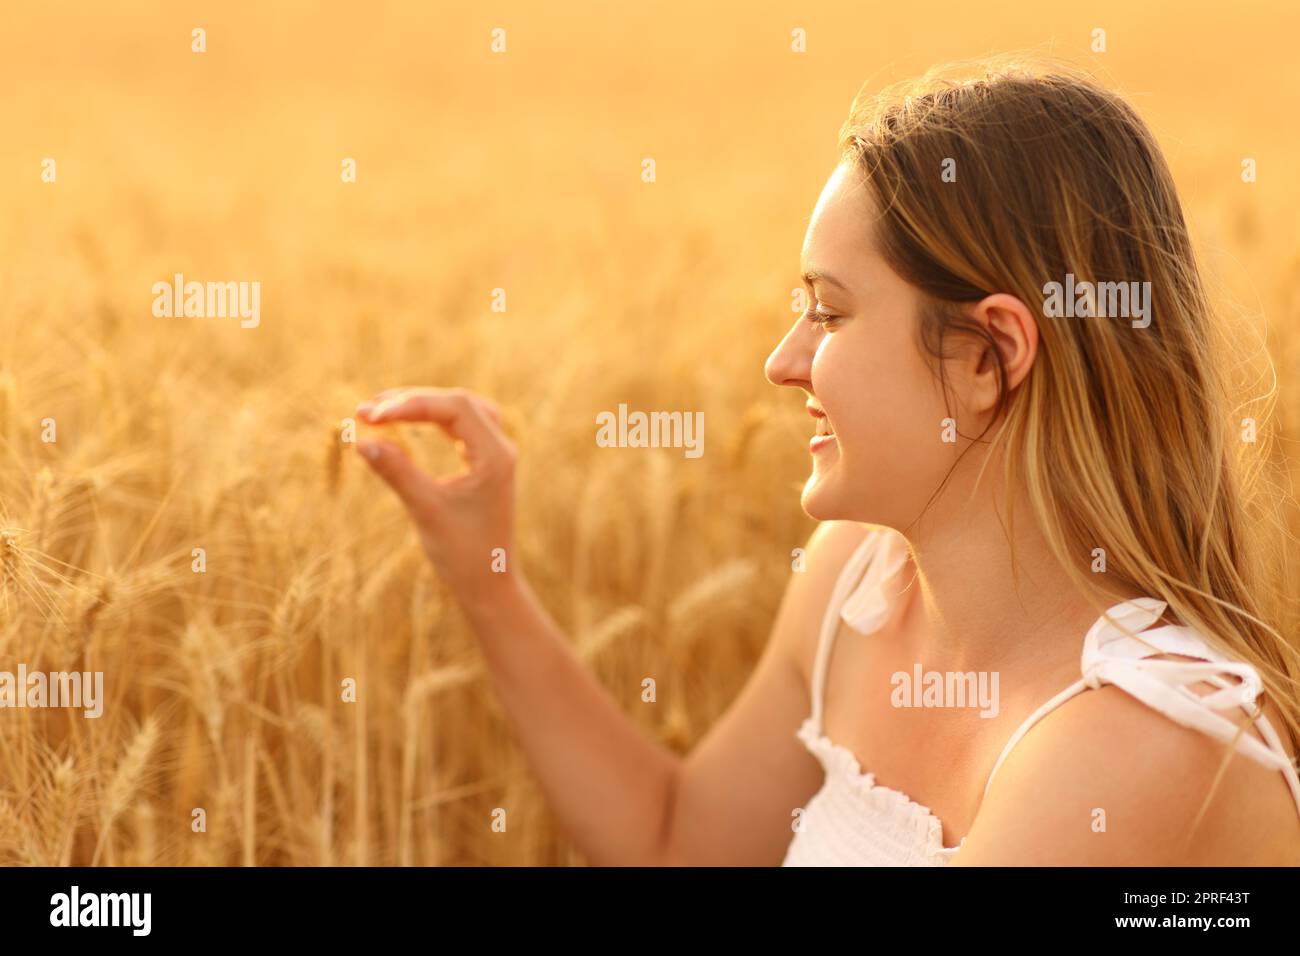 Happy woman touching wheat in a golden field Stock Photo